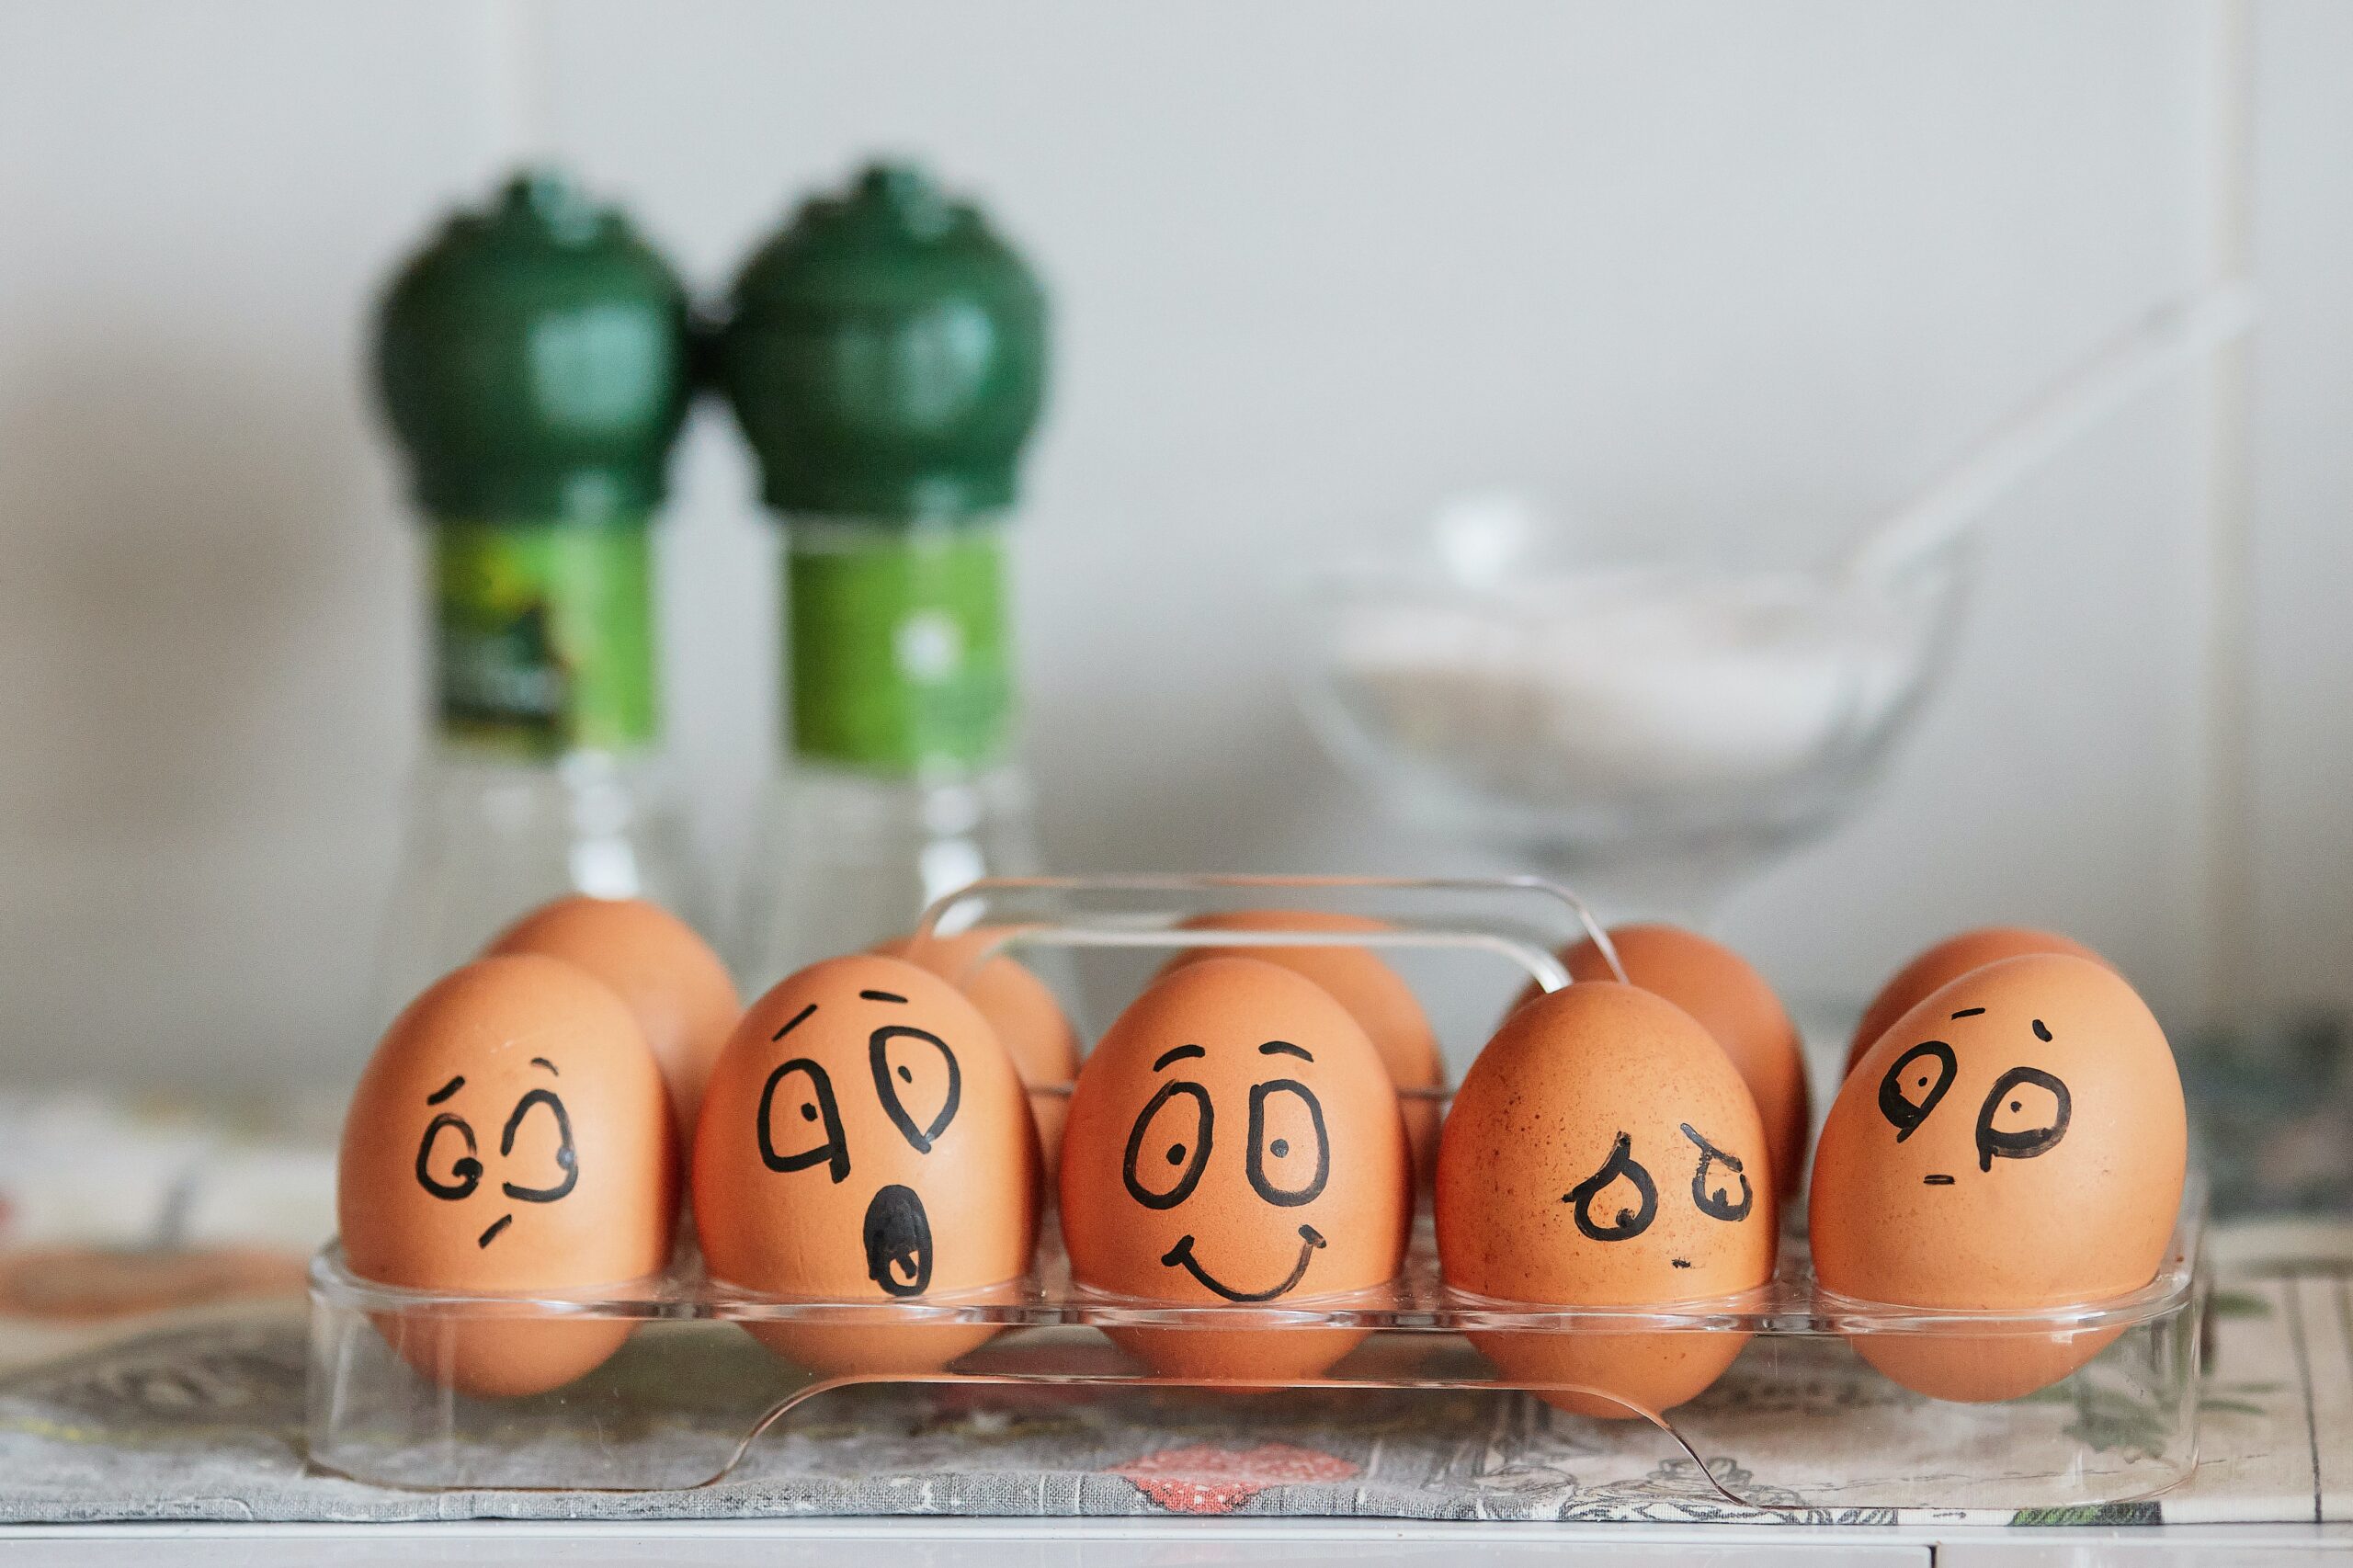 Eggs with faces drawn on expressing emotions: sad, unsure, happy, shocked